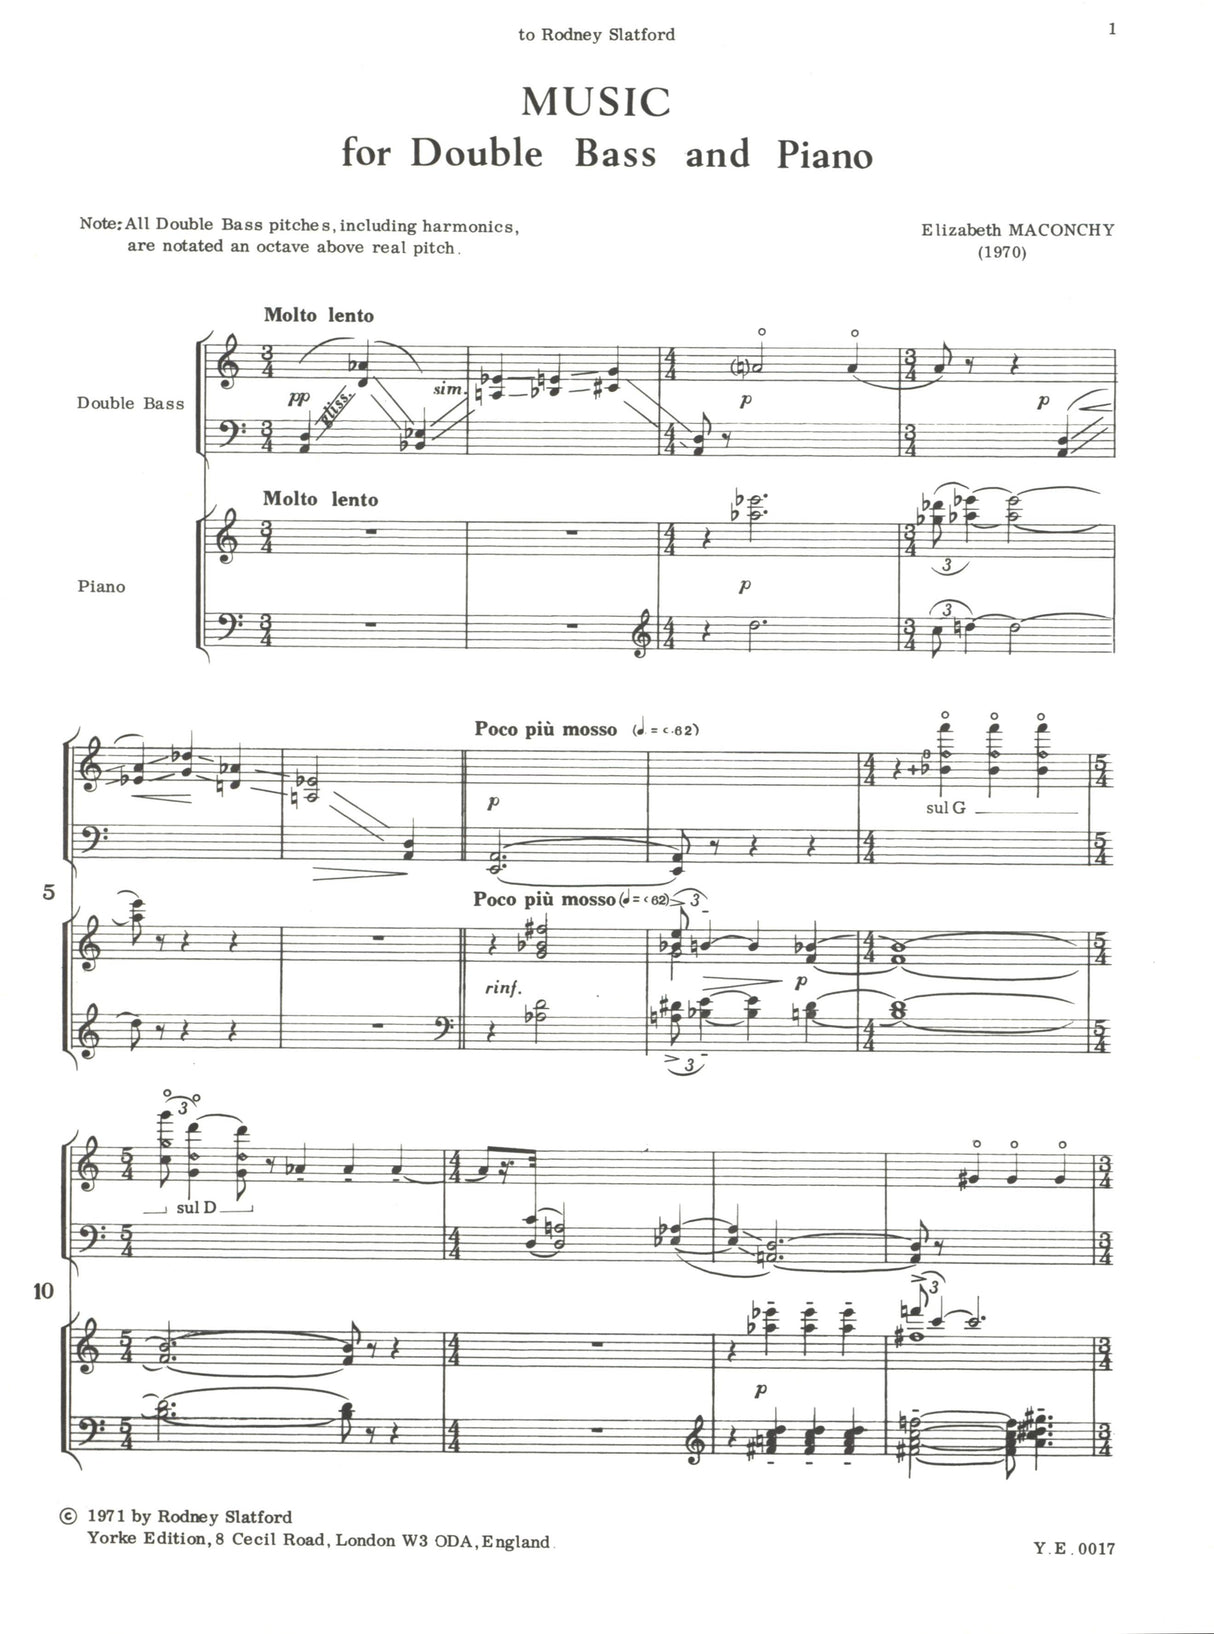 Maconchy: Music for Double Bass and Piano